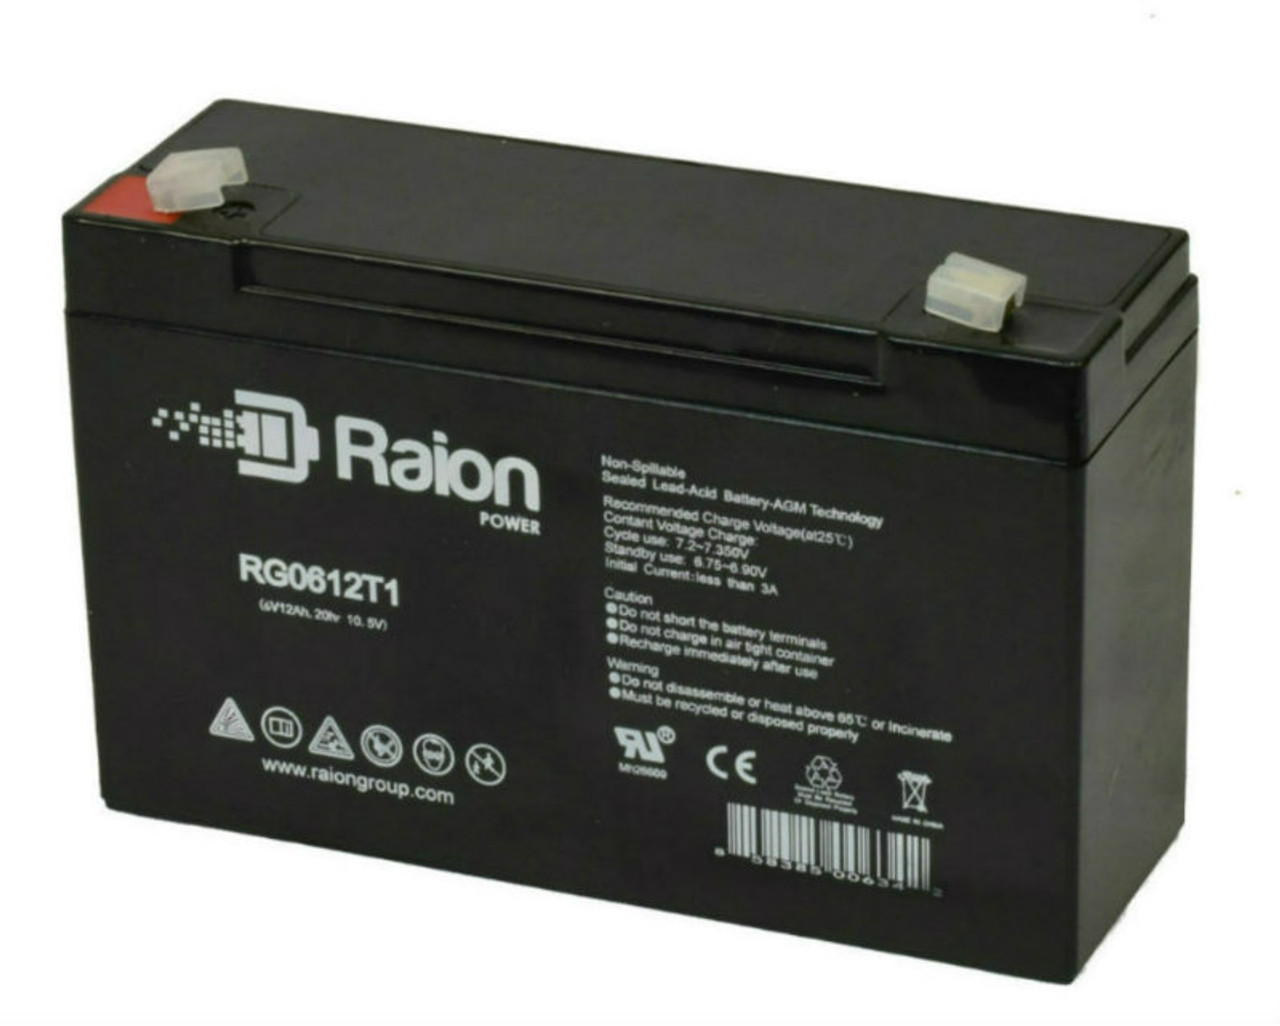 Raion Power RG06120T1 Replacement Emergency Light Battery for Holophane E110